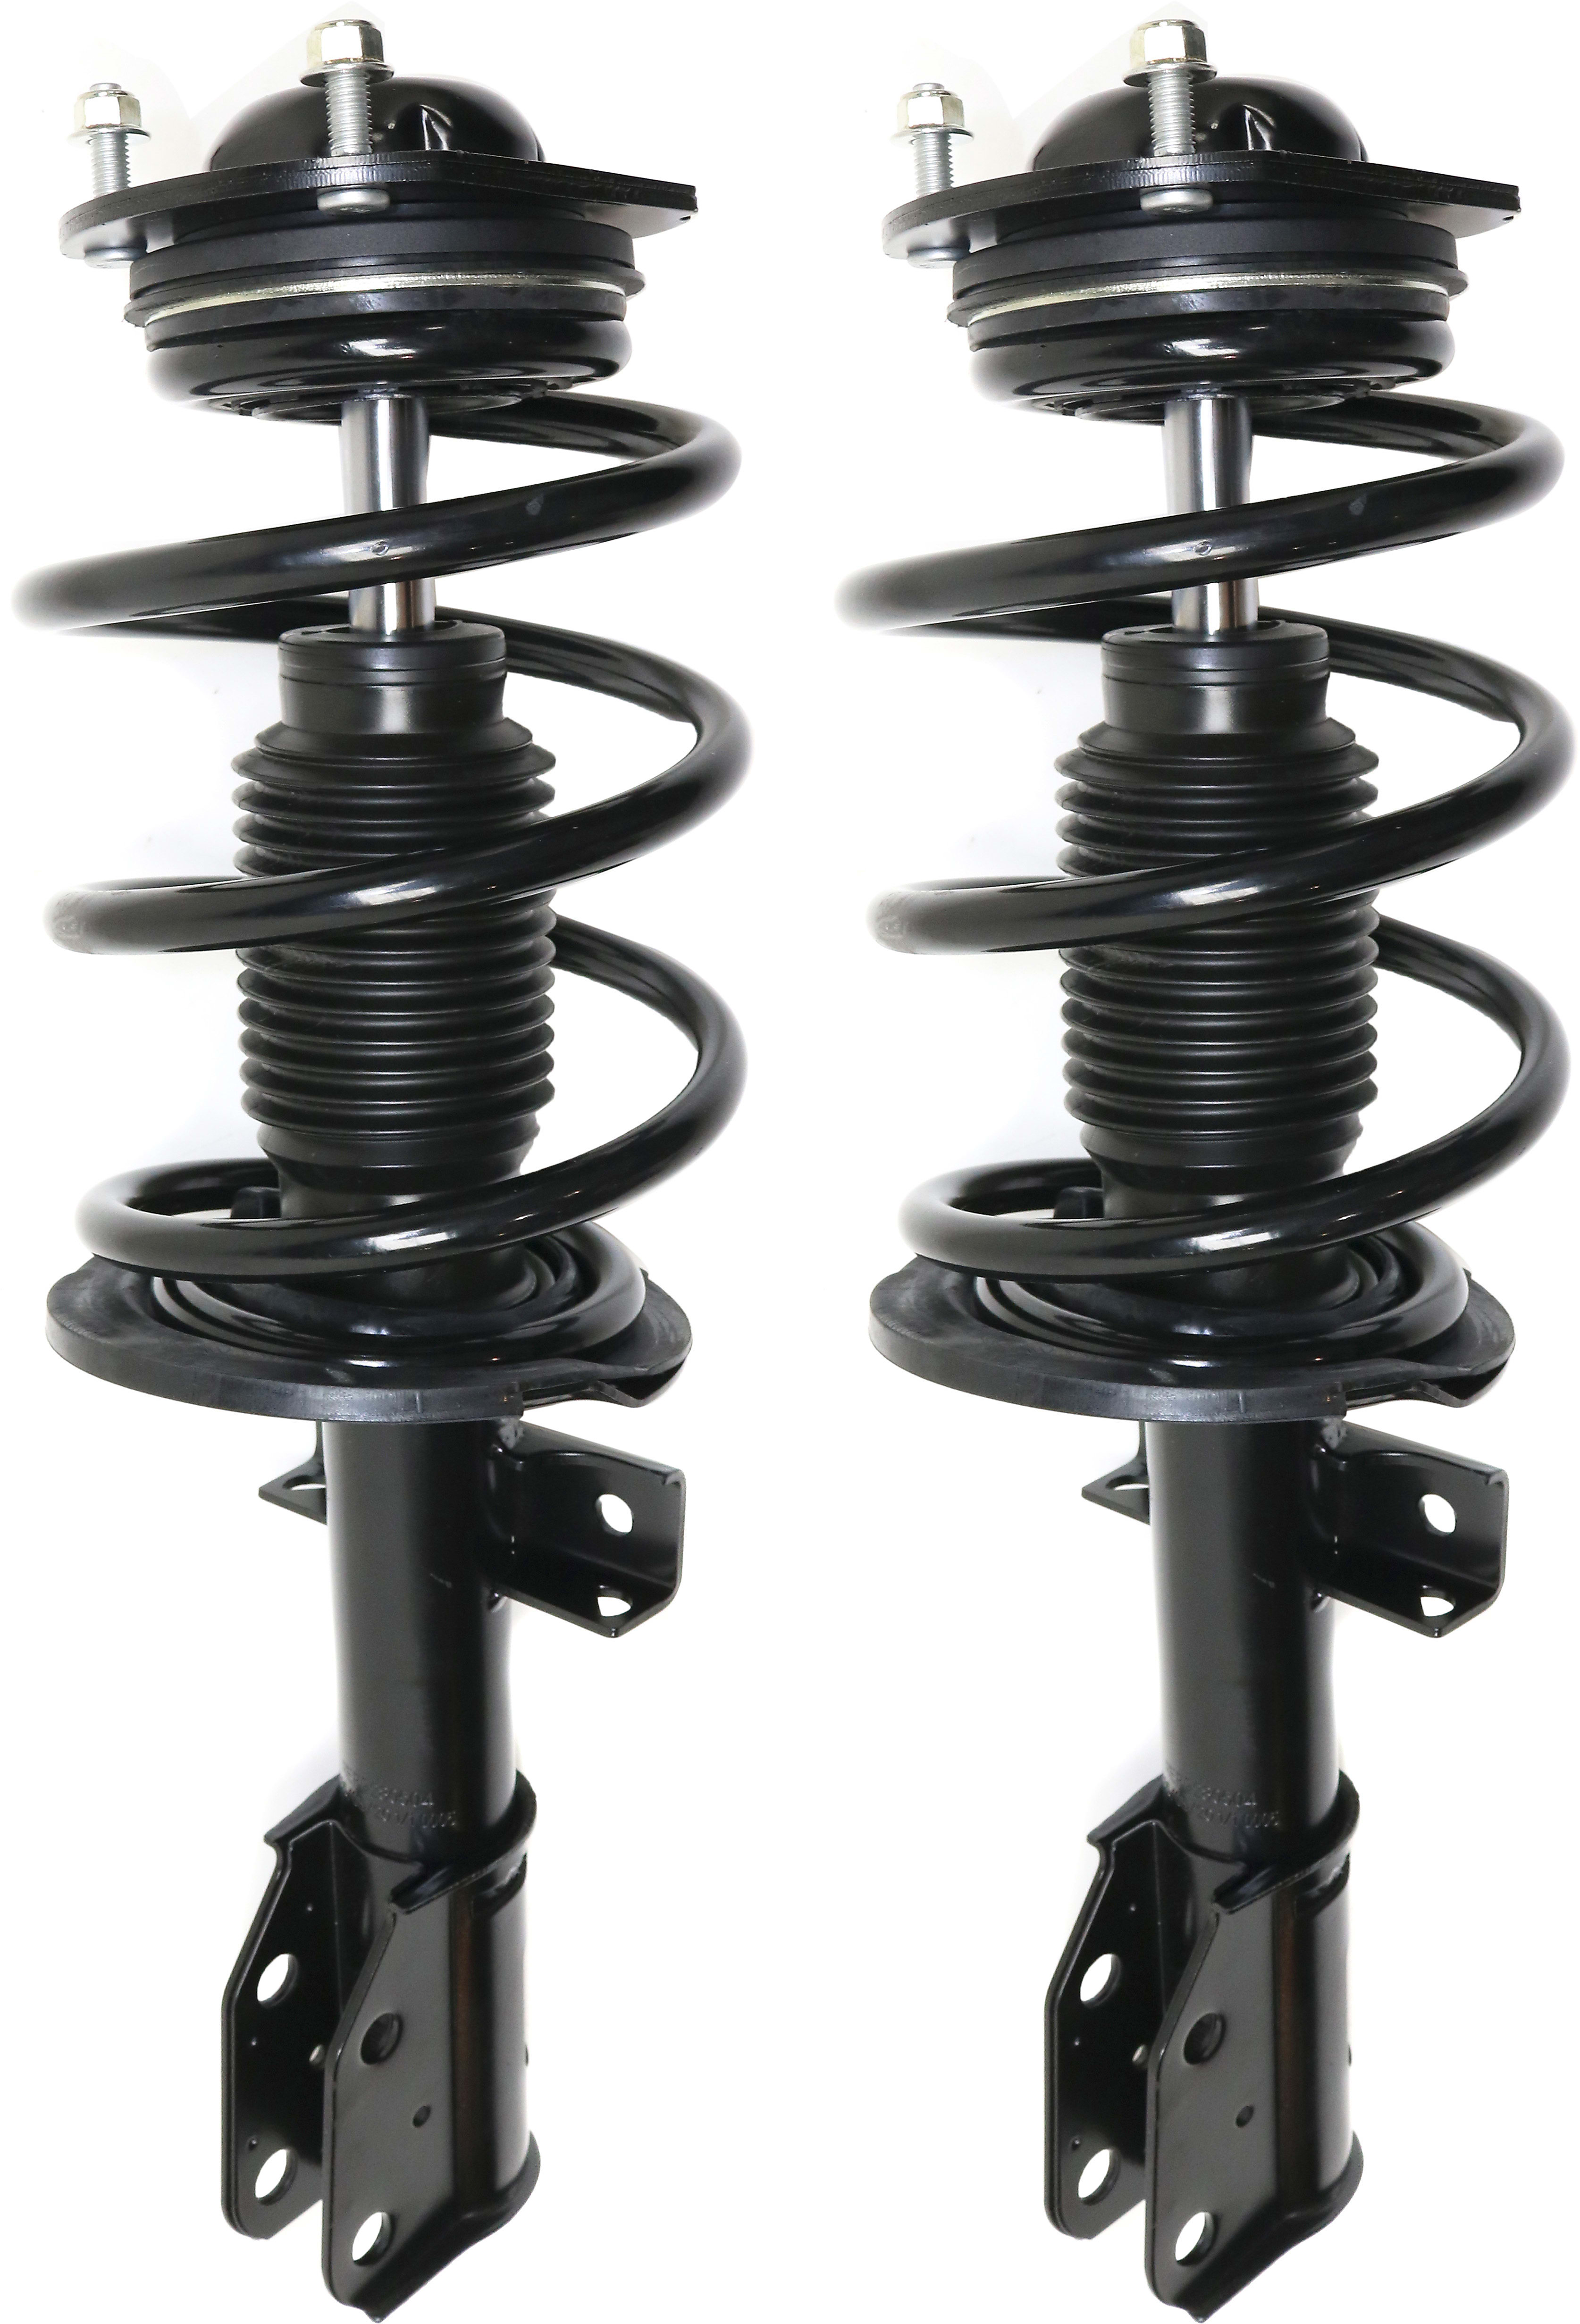 SET-KYKG54100 KYB Shock Absorber and Strut Assemblies Set of 4 New for Chevy